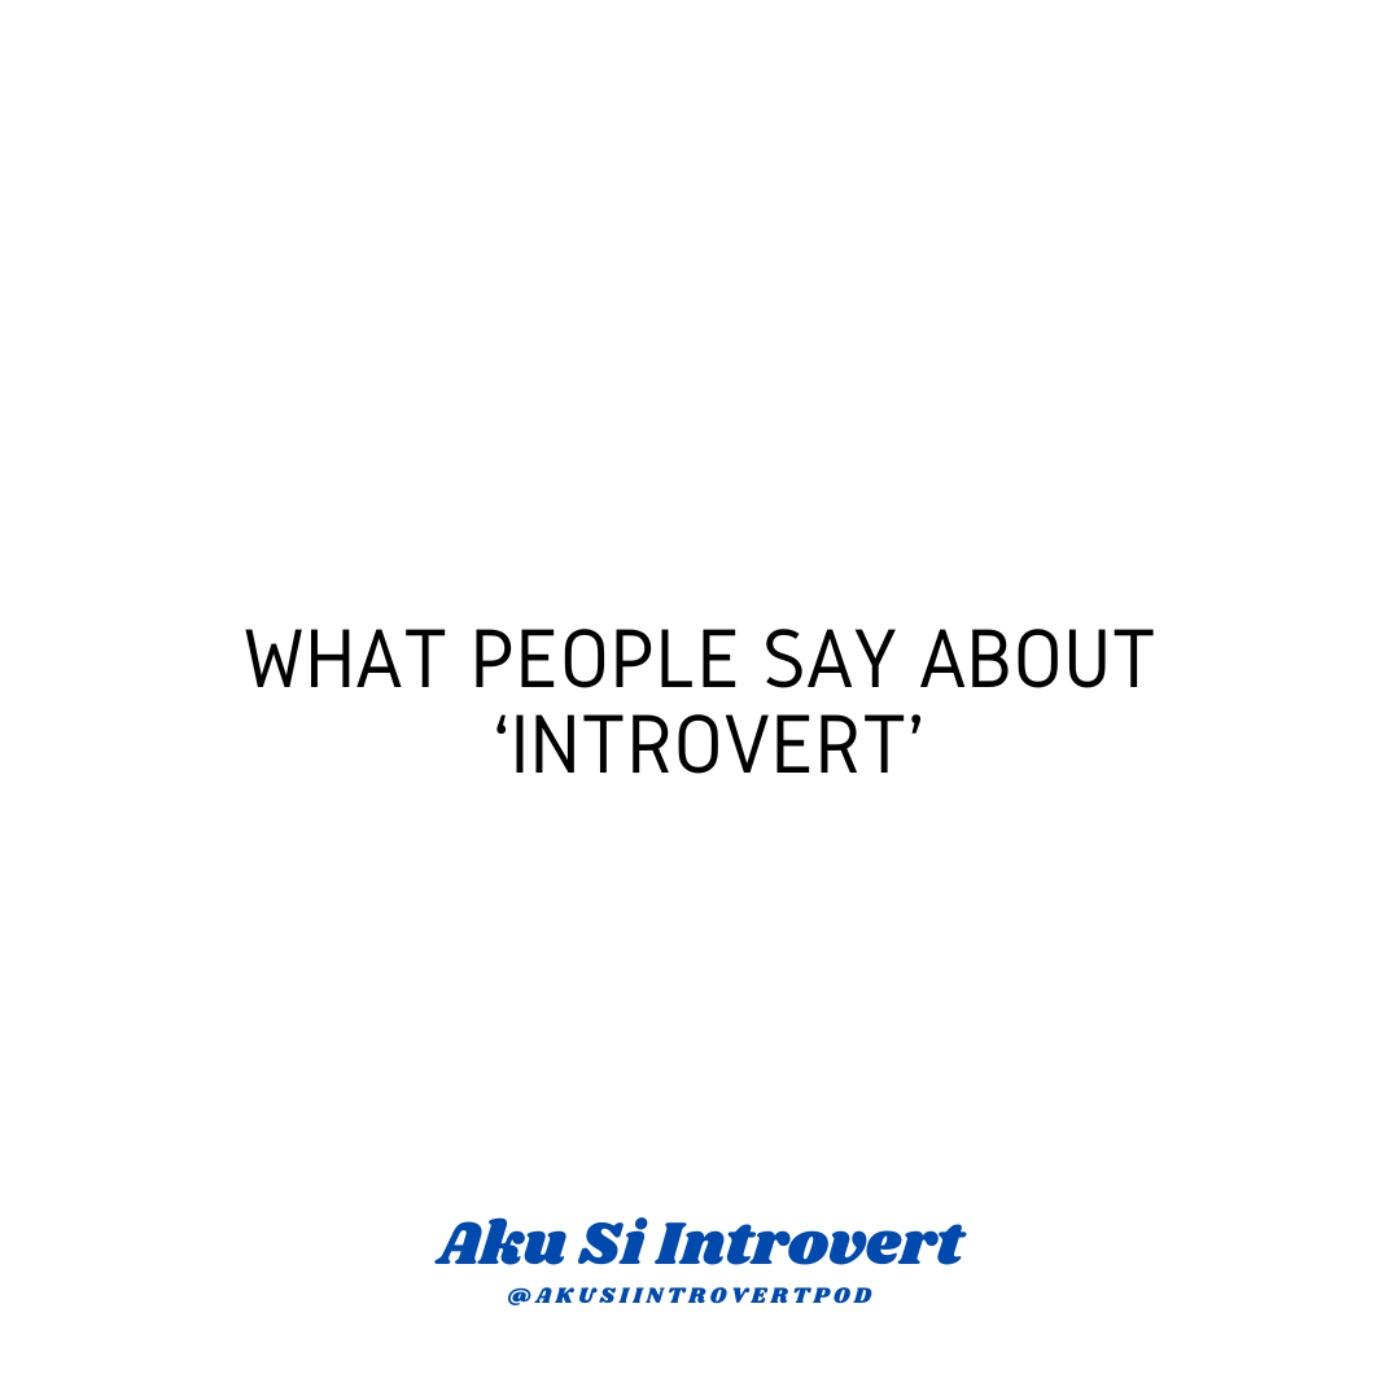 INTROVERT SERIES: How People Say About Introvert